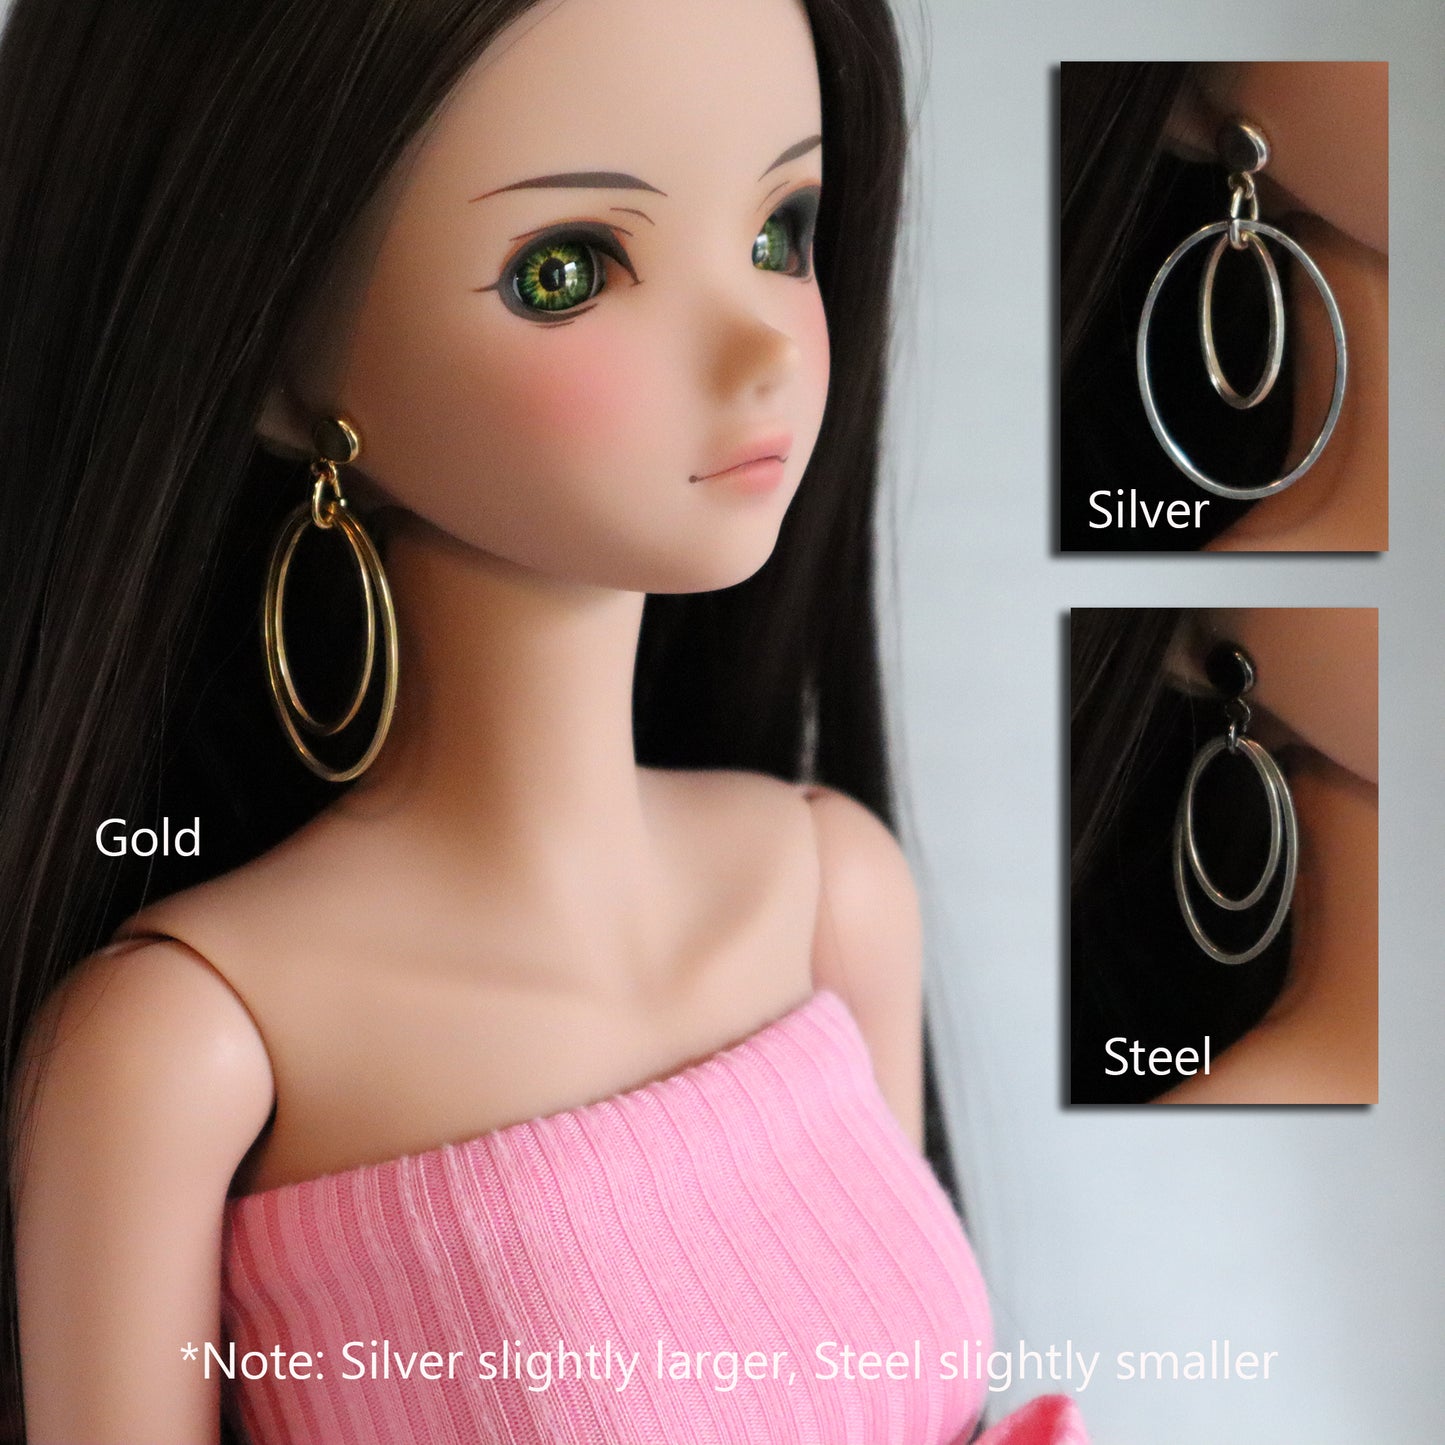 No-Hole Earrings for Vinyl Dolls - Oval Double Hoops (Silver, Gold or Steel)